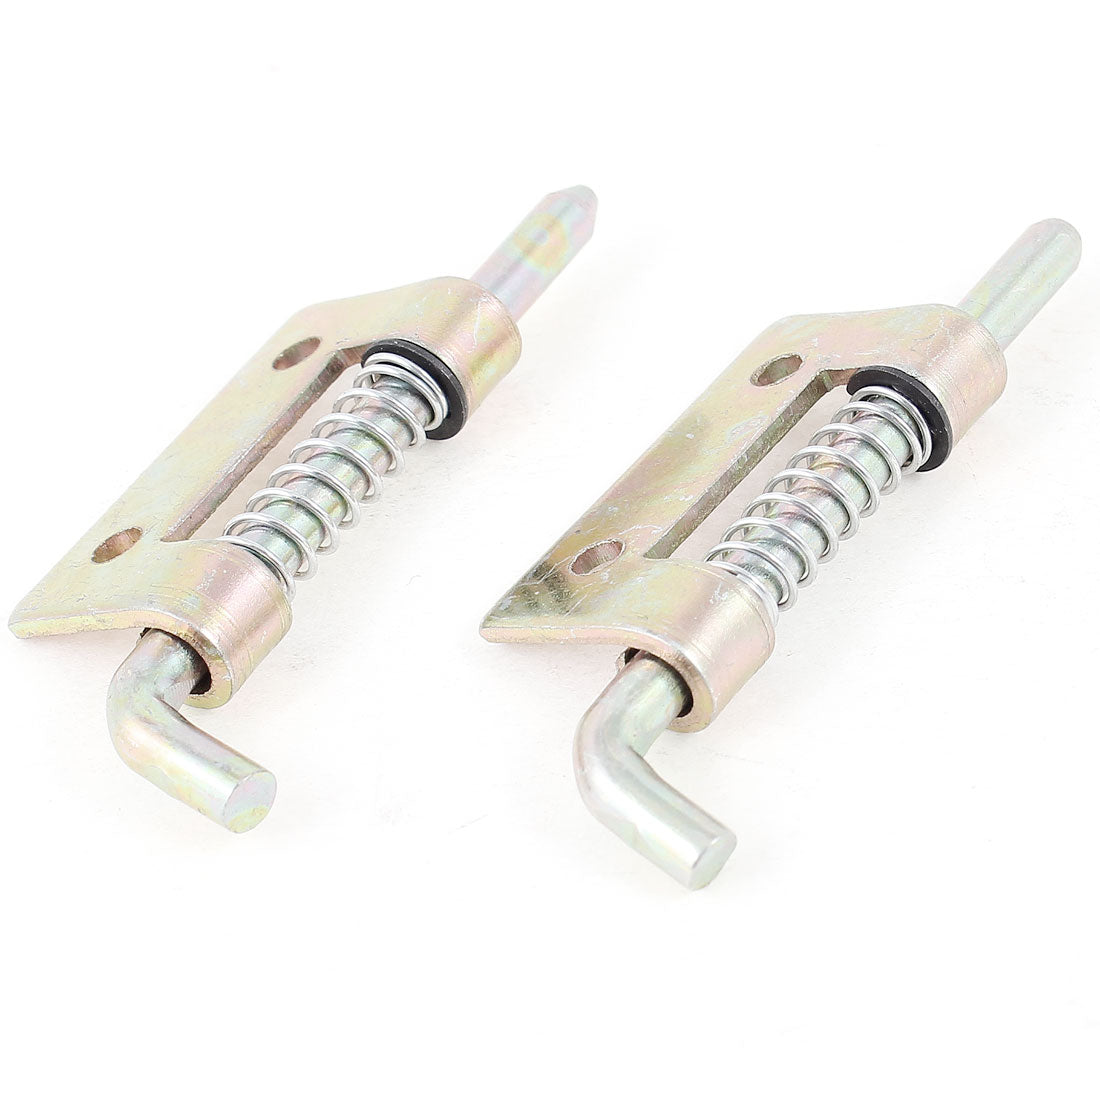 uxcell Uxcell 2 Pcs Right-handed Spring Loaded Lock Barrel Bolt Latch 5.5cm Length